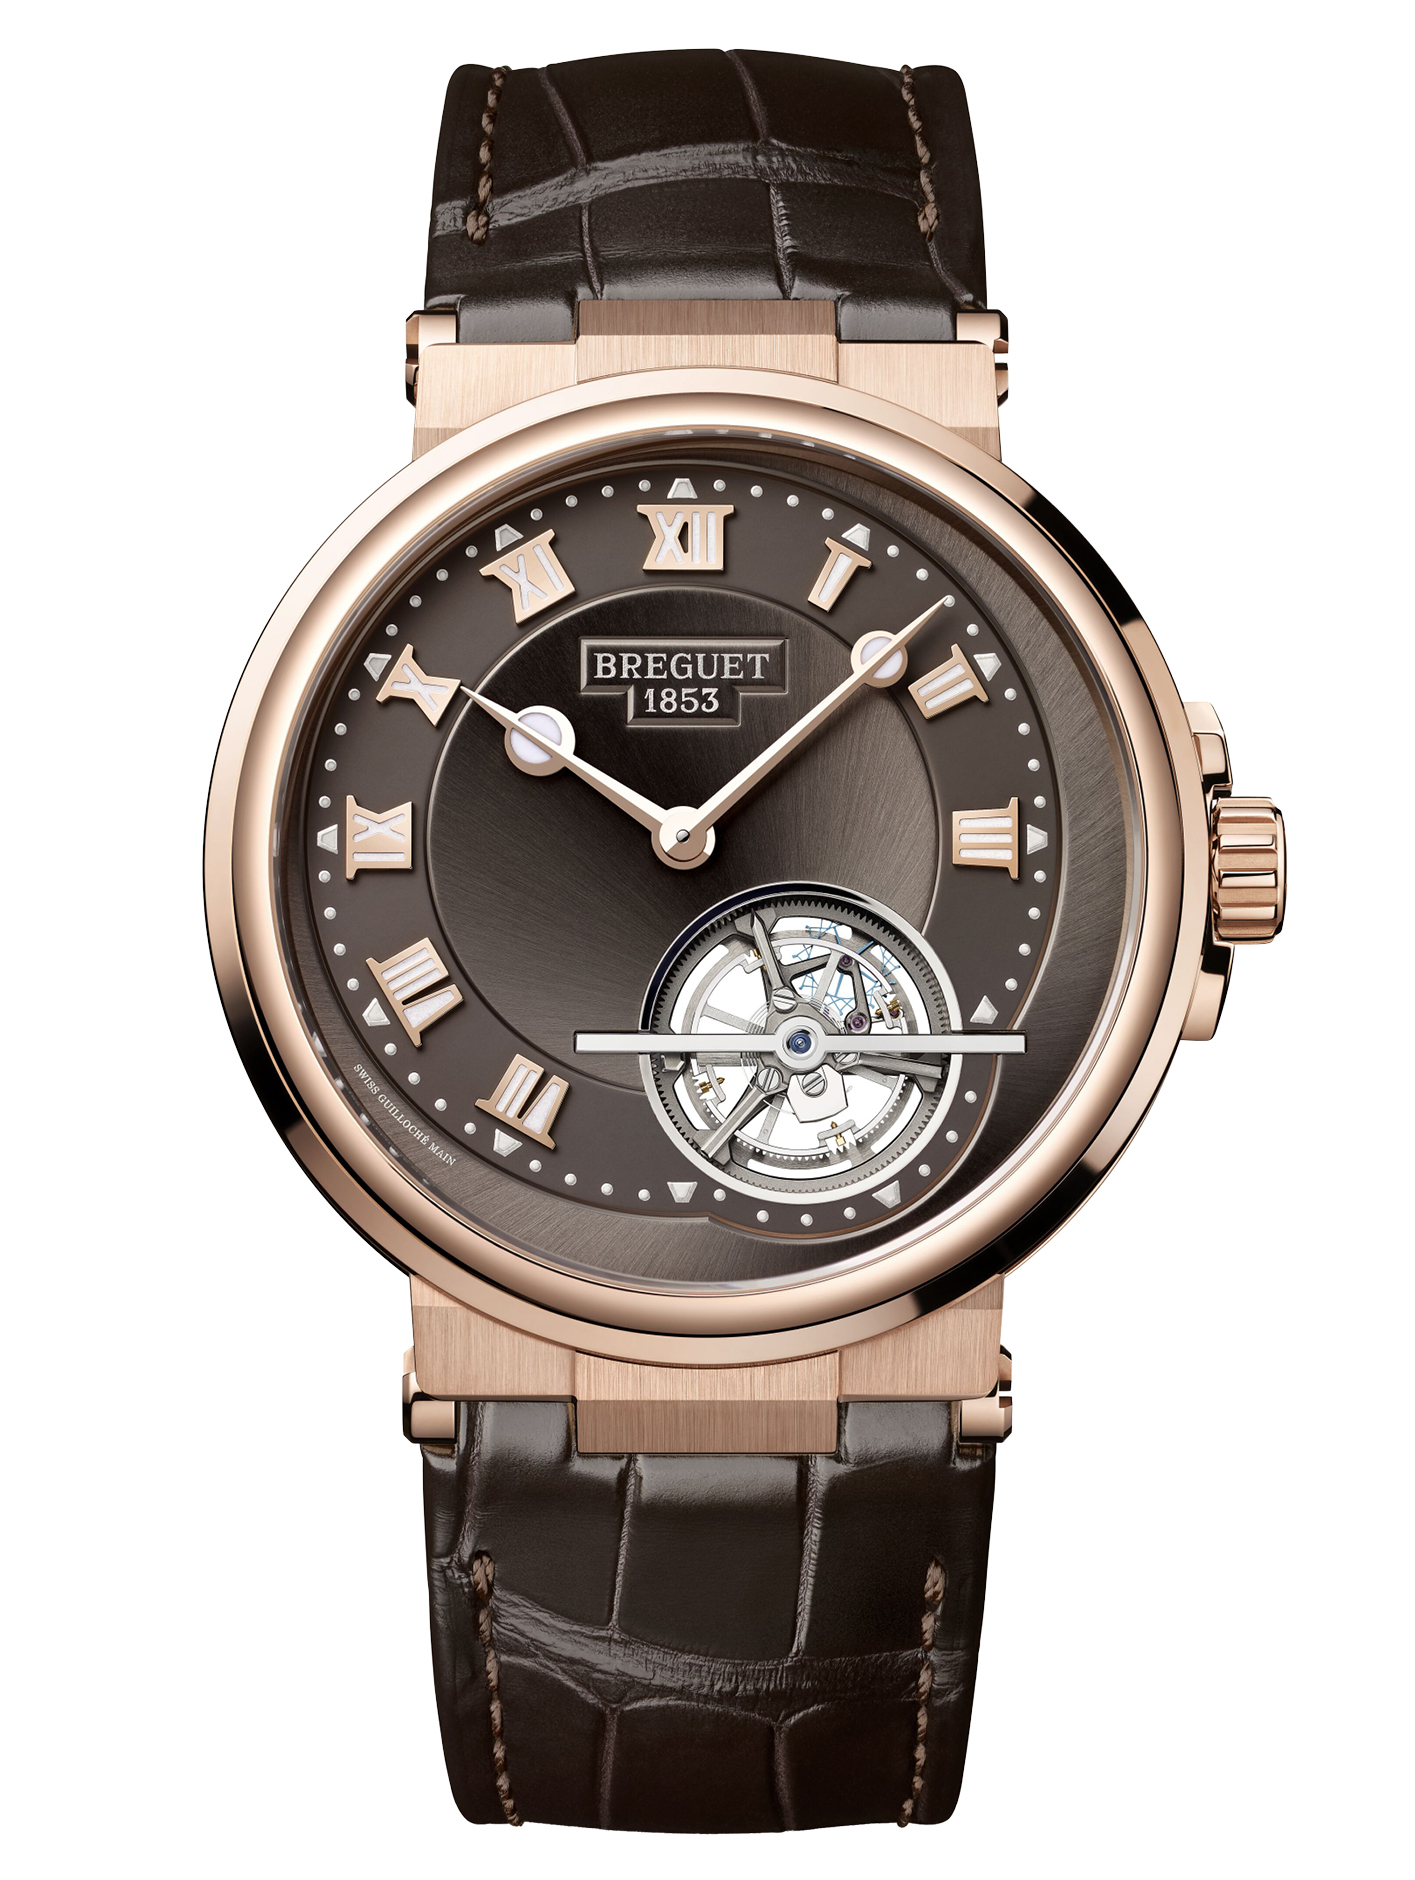 Breguet’s Marine Tourbillon 5577 in rose gold with sunburst slate grey dial and brown alligator leather strap